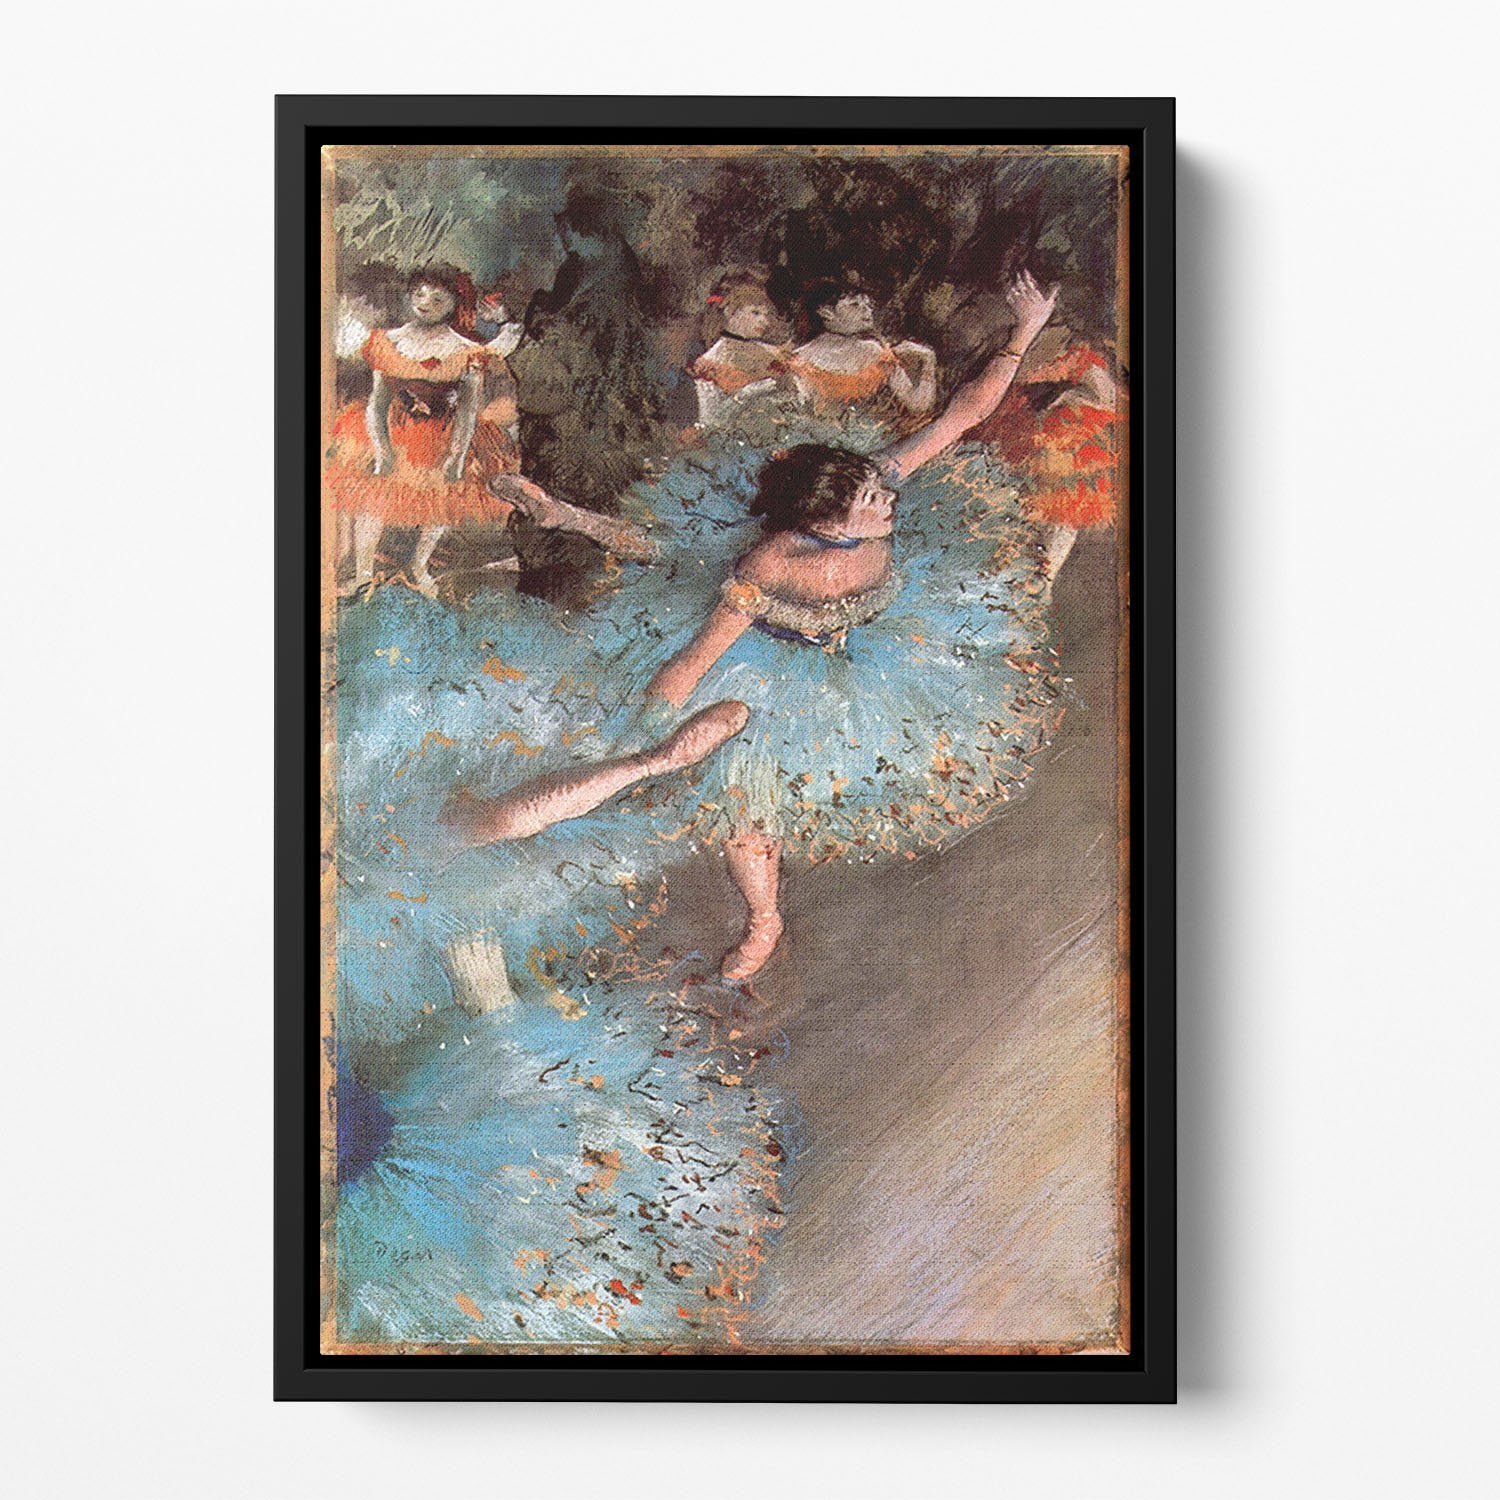 The Greens dancers by Degas Floating Framed Canvas